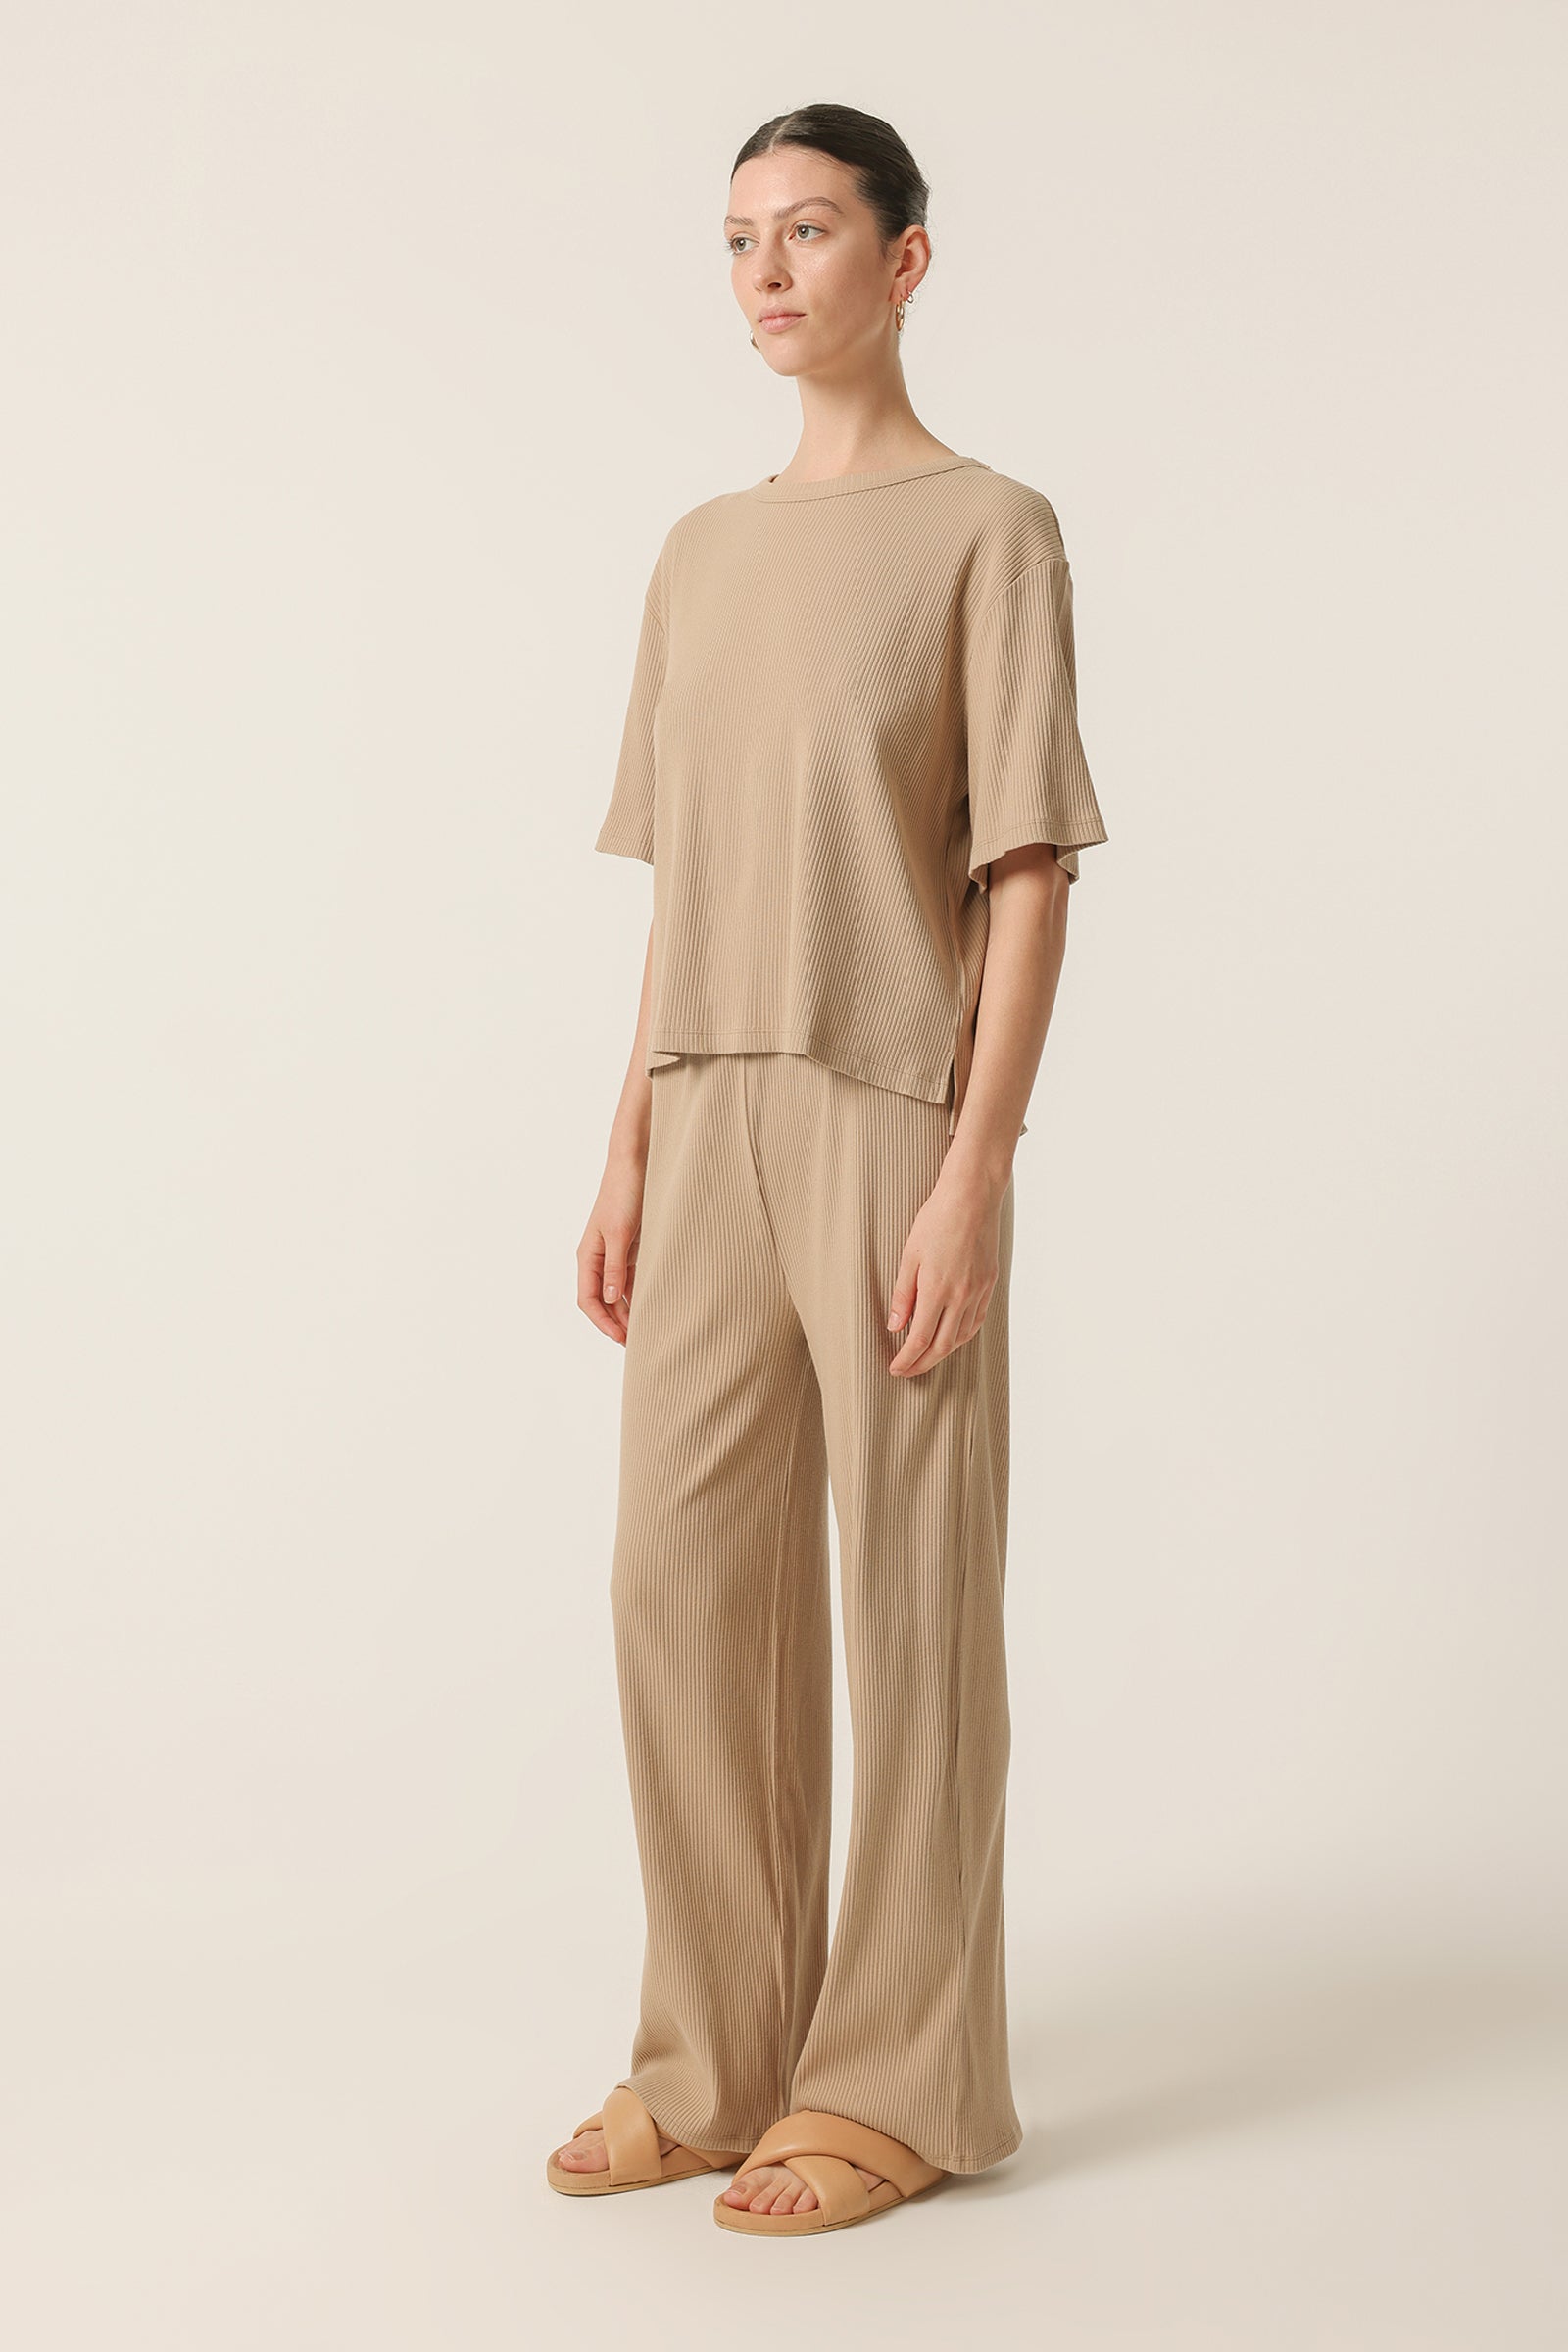 Nude Lucy Nude Lounge Ribbed Pant In A Beige Sepia Colour 